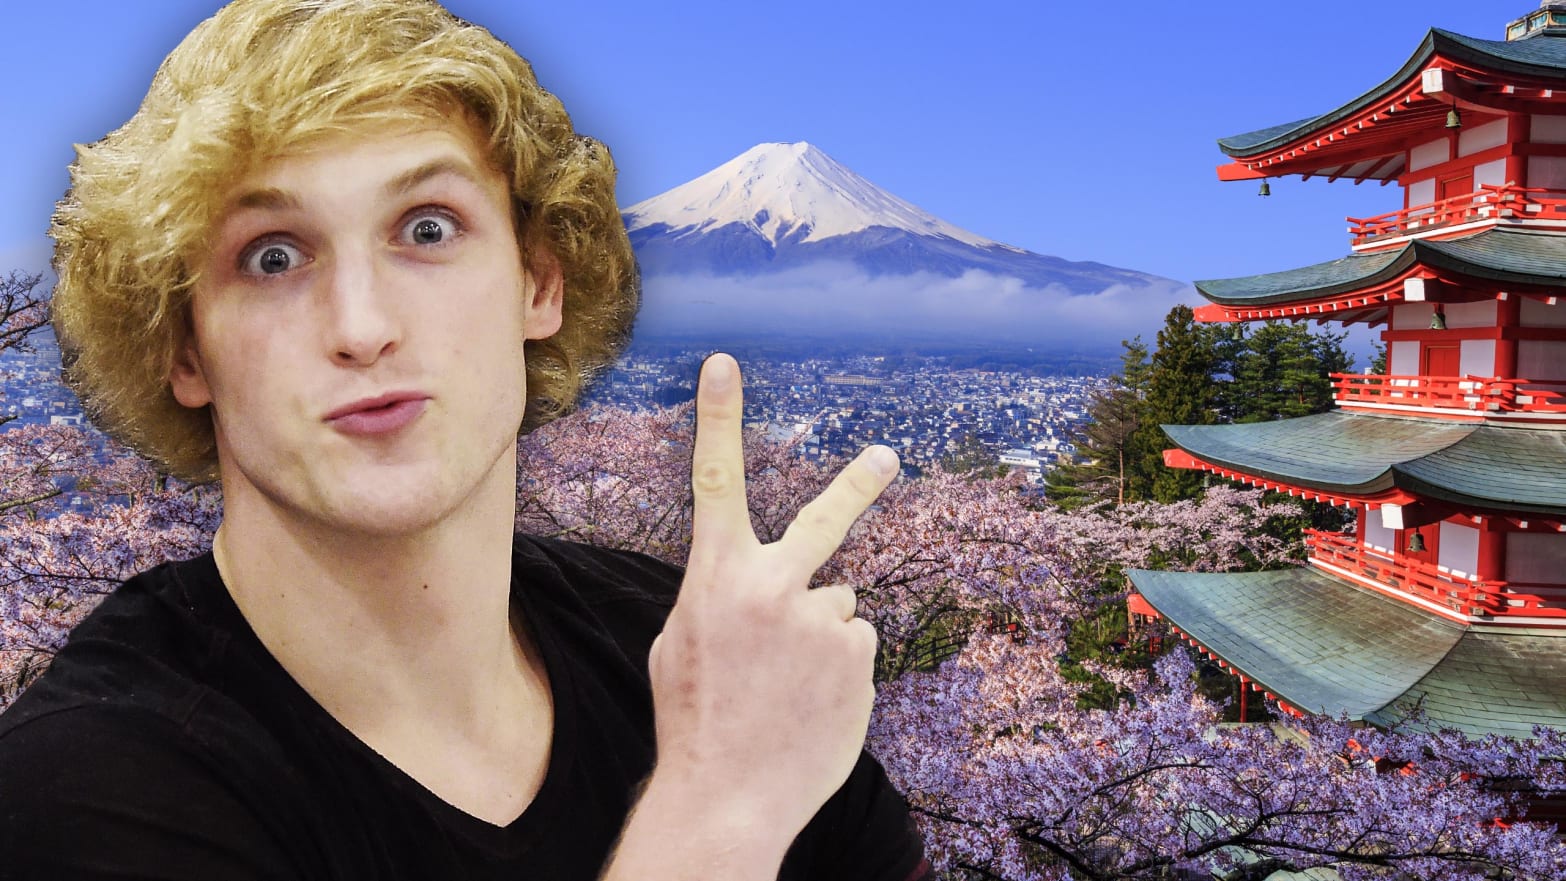 Japanese Bullying Porn Videos - Japanese Cops Say Logan Paul Videos Broke the Lawâ€”and They'd ...